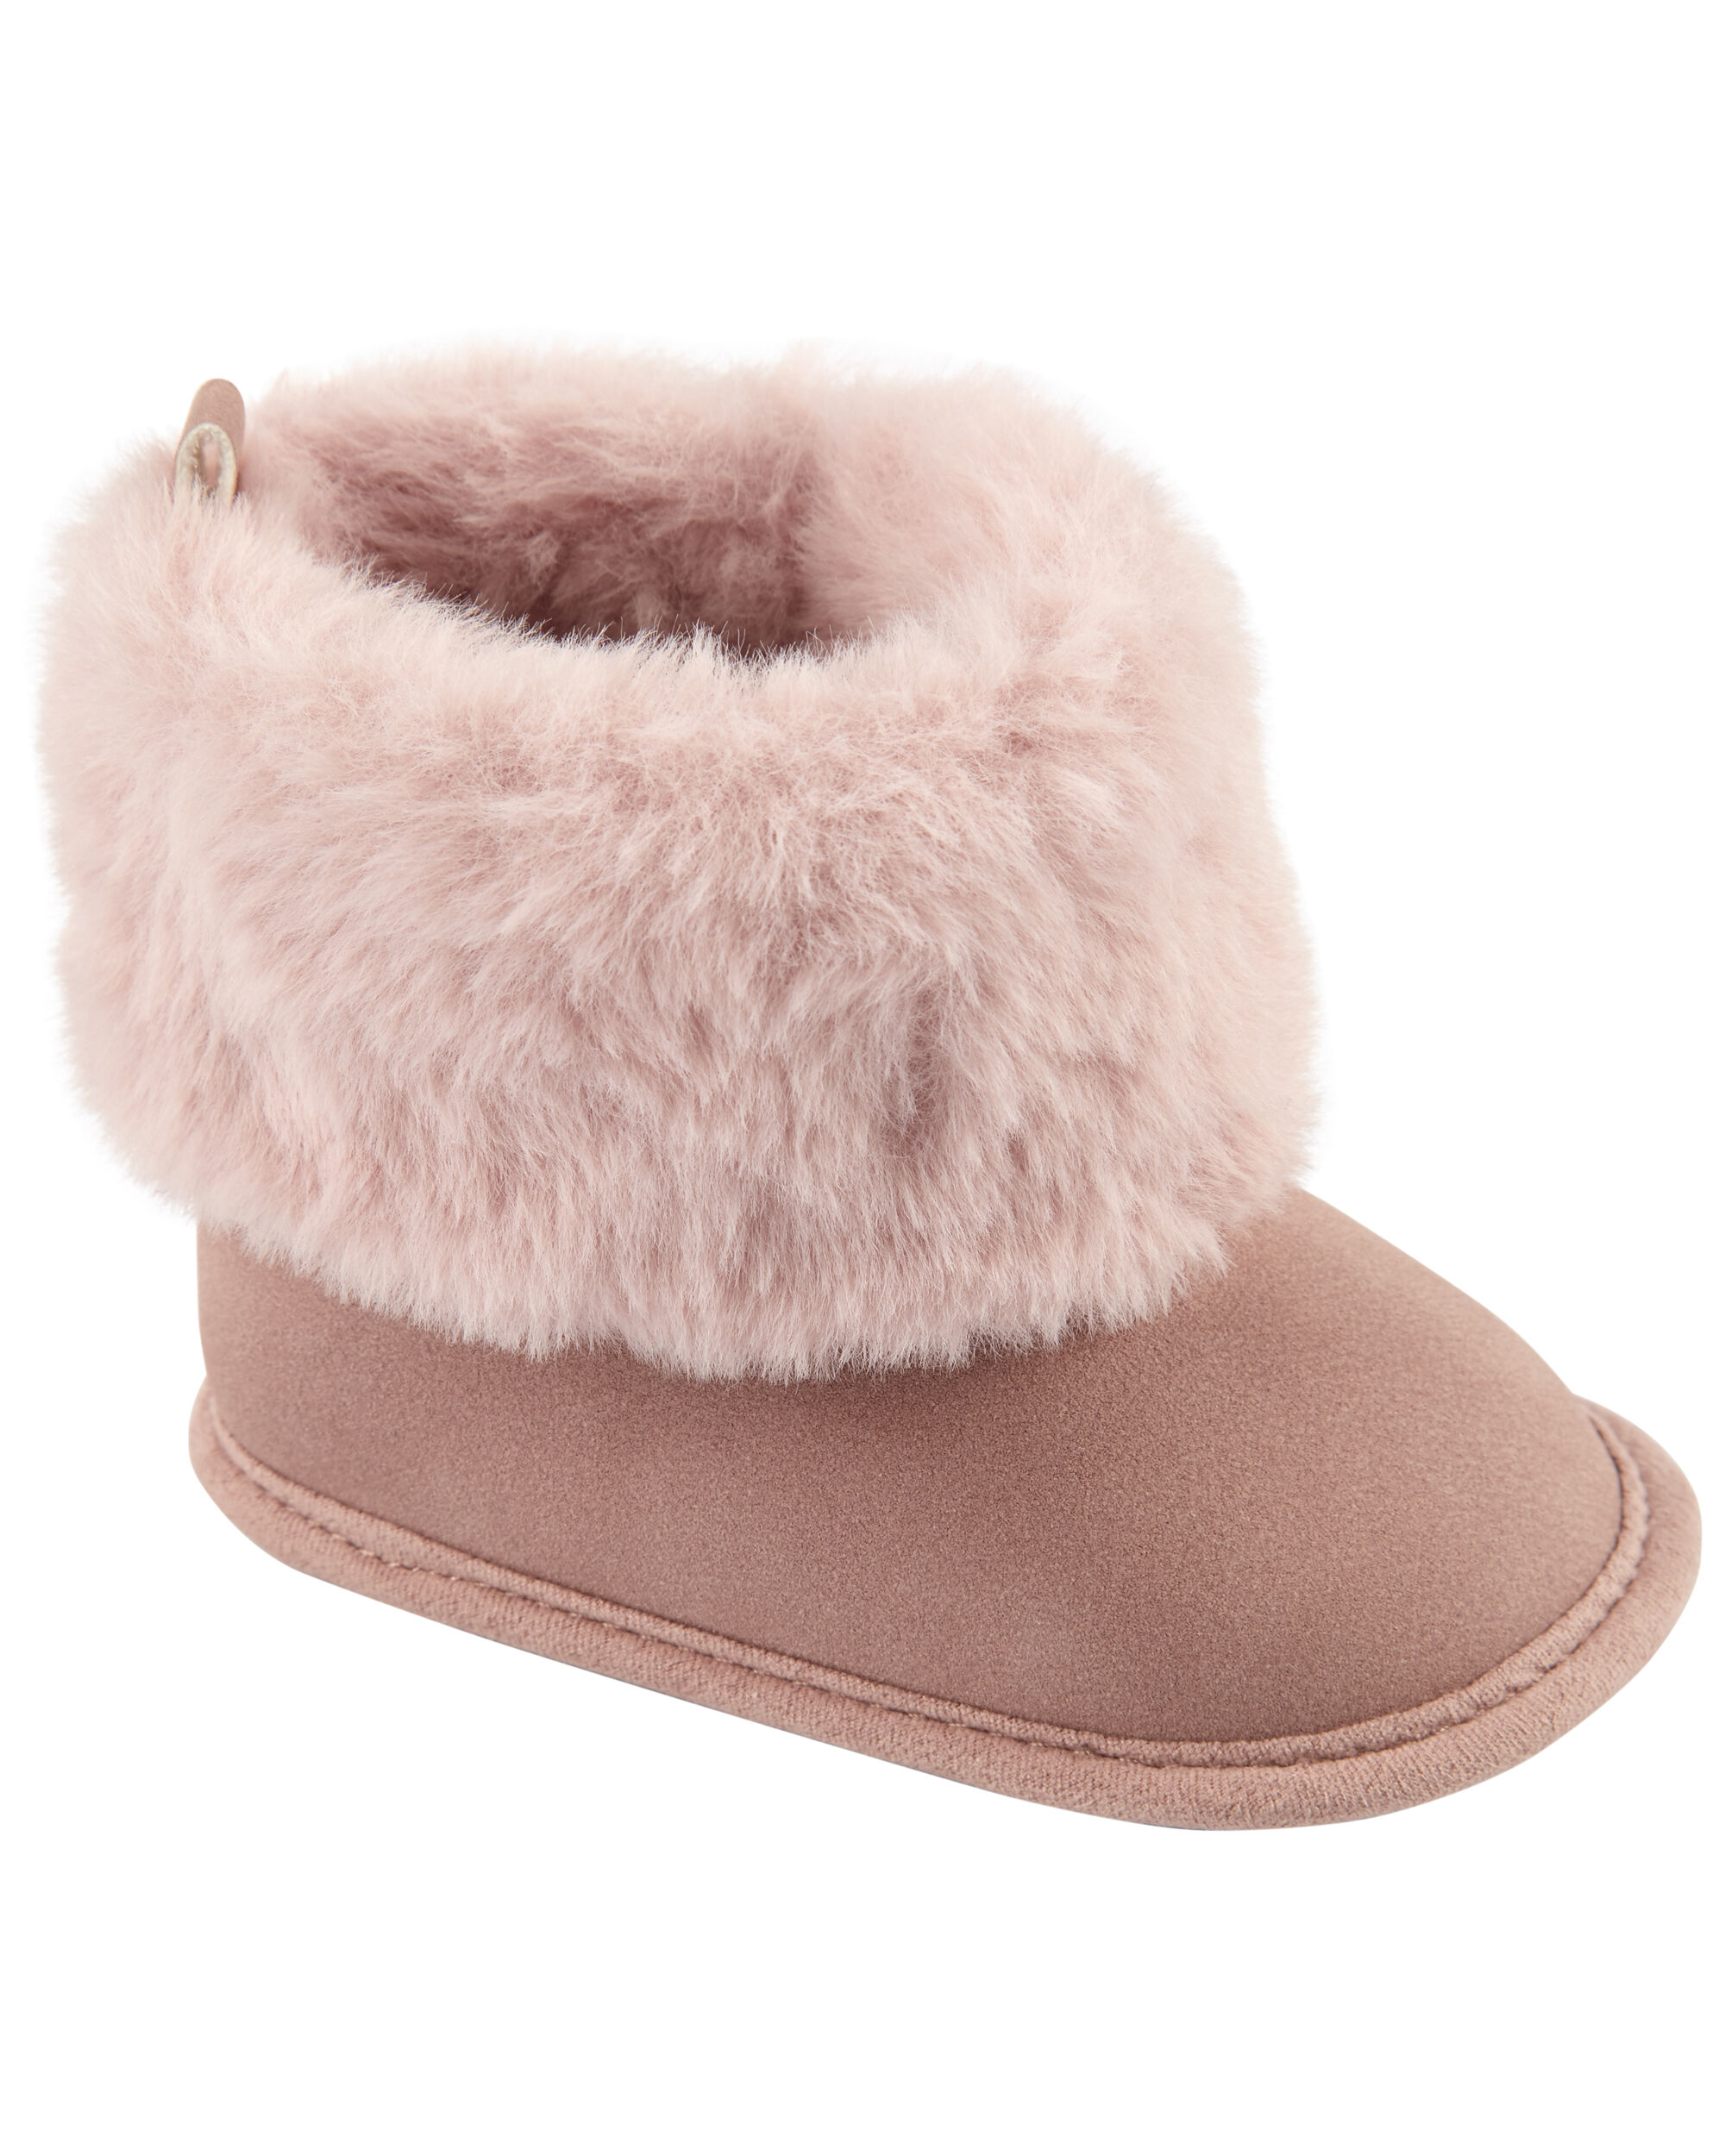 Baby Carters Faux Fur Bootie Baby Shoes